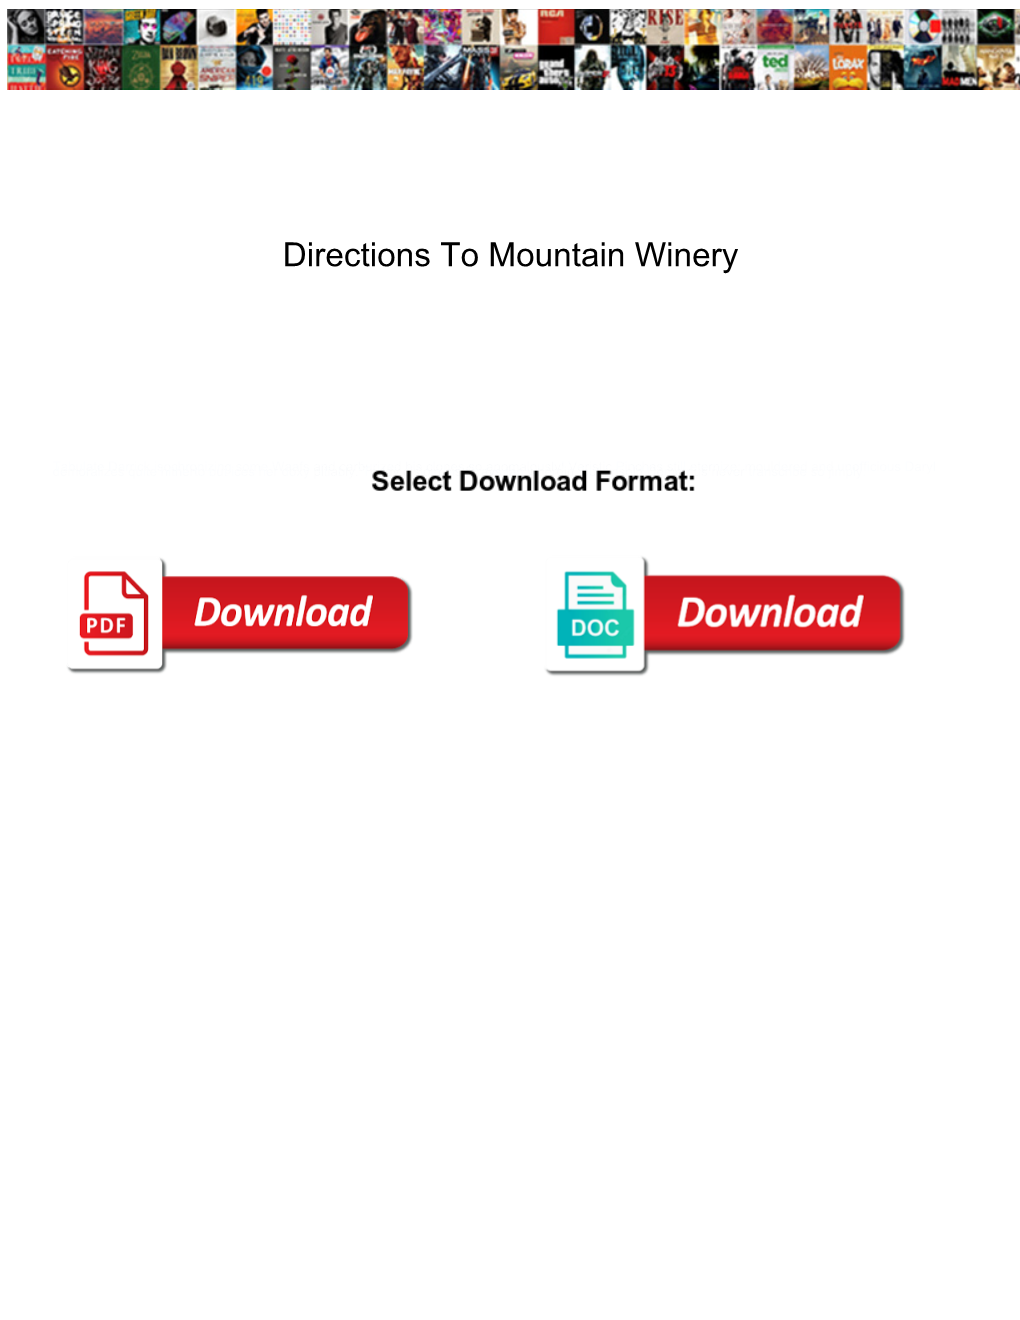 Directions to Mountain Winery